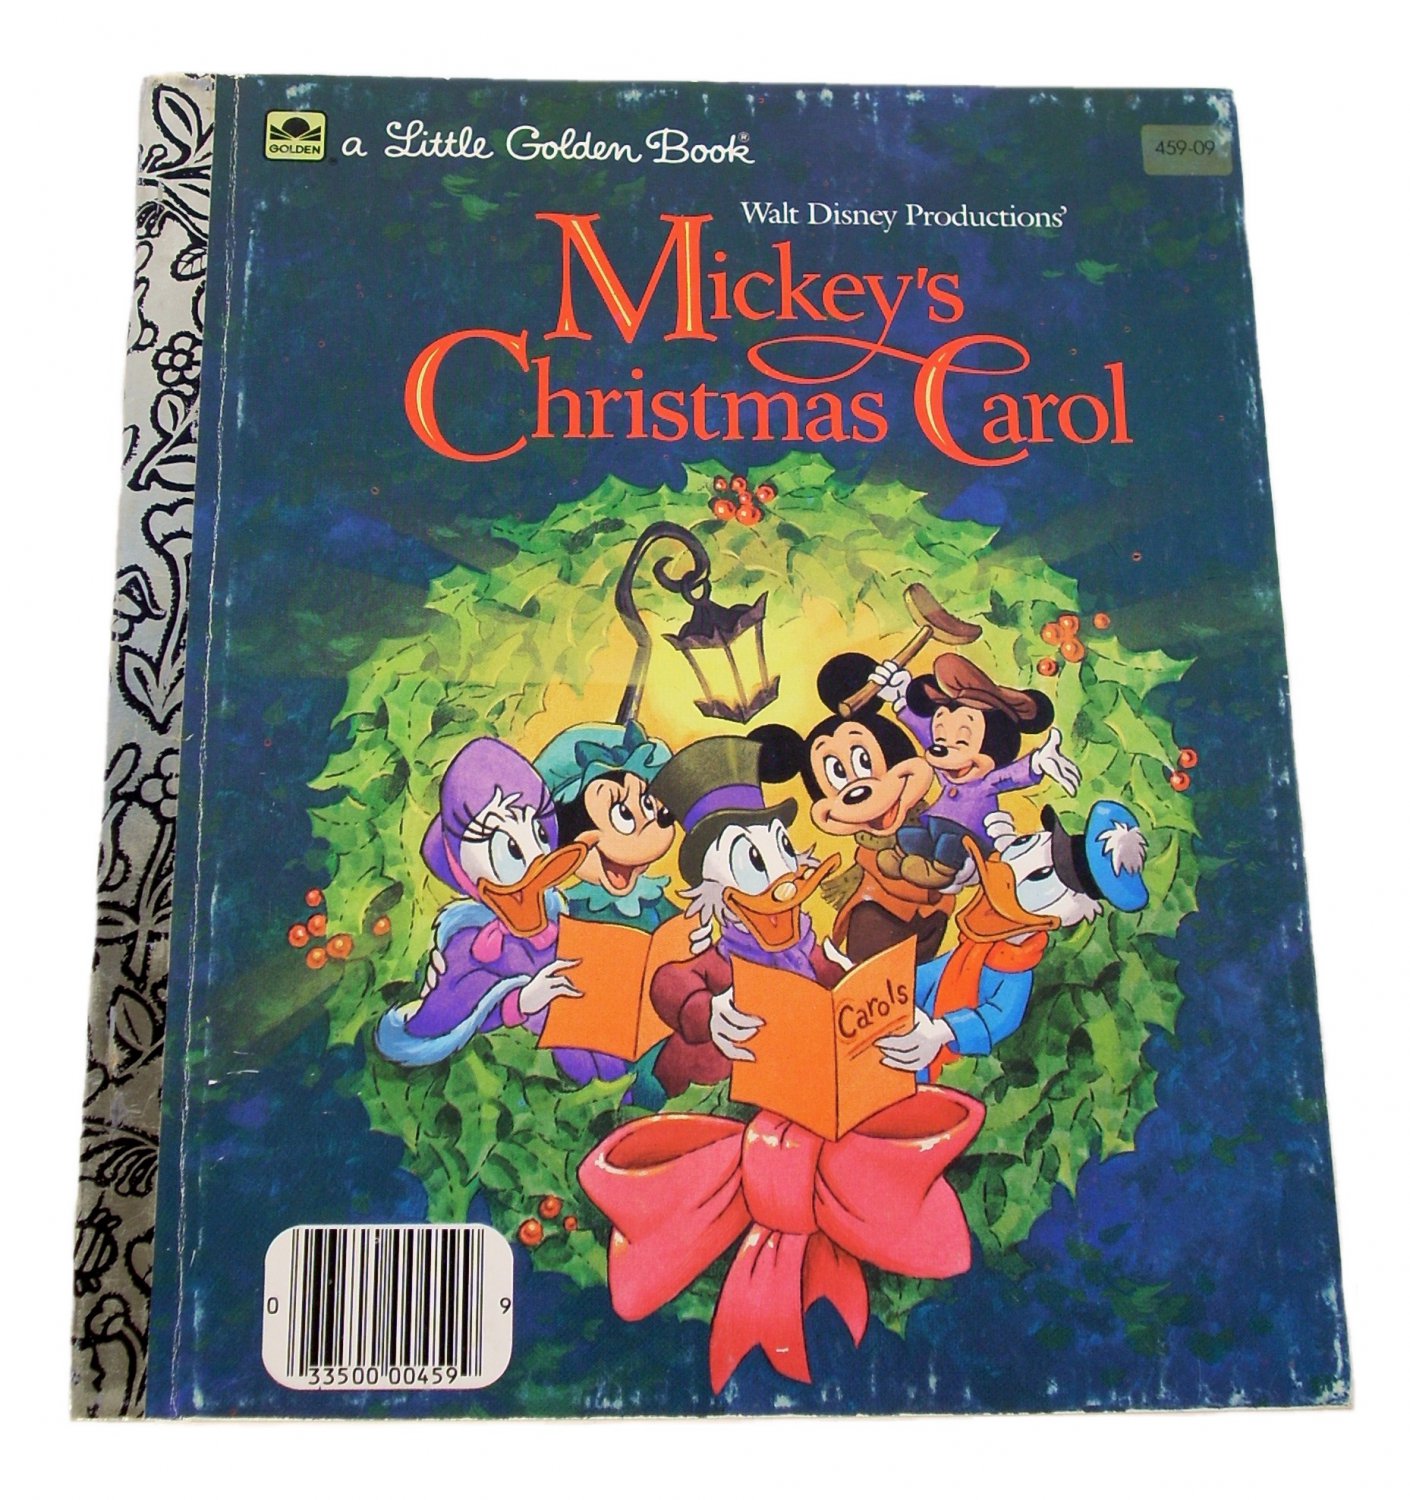 Mickey's Christmas Carol by Walt Disney Productions Little Golden Book (1983, Hardcover) #459-09